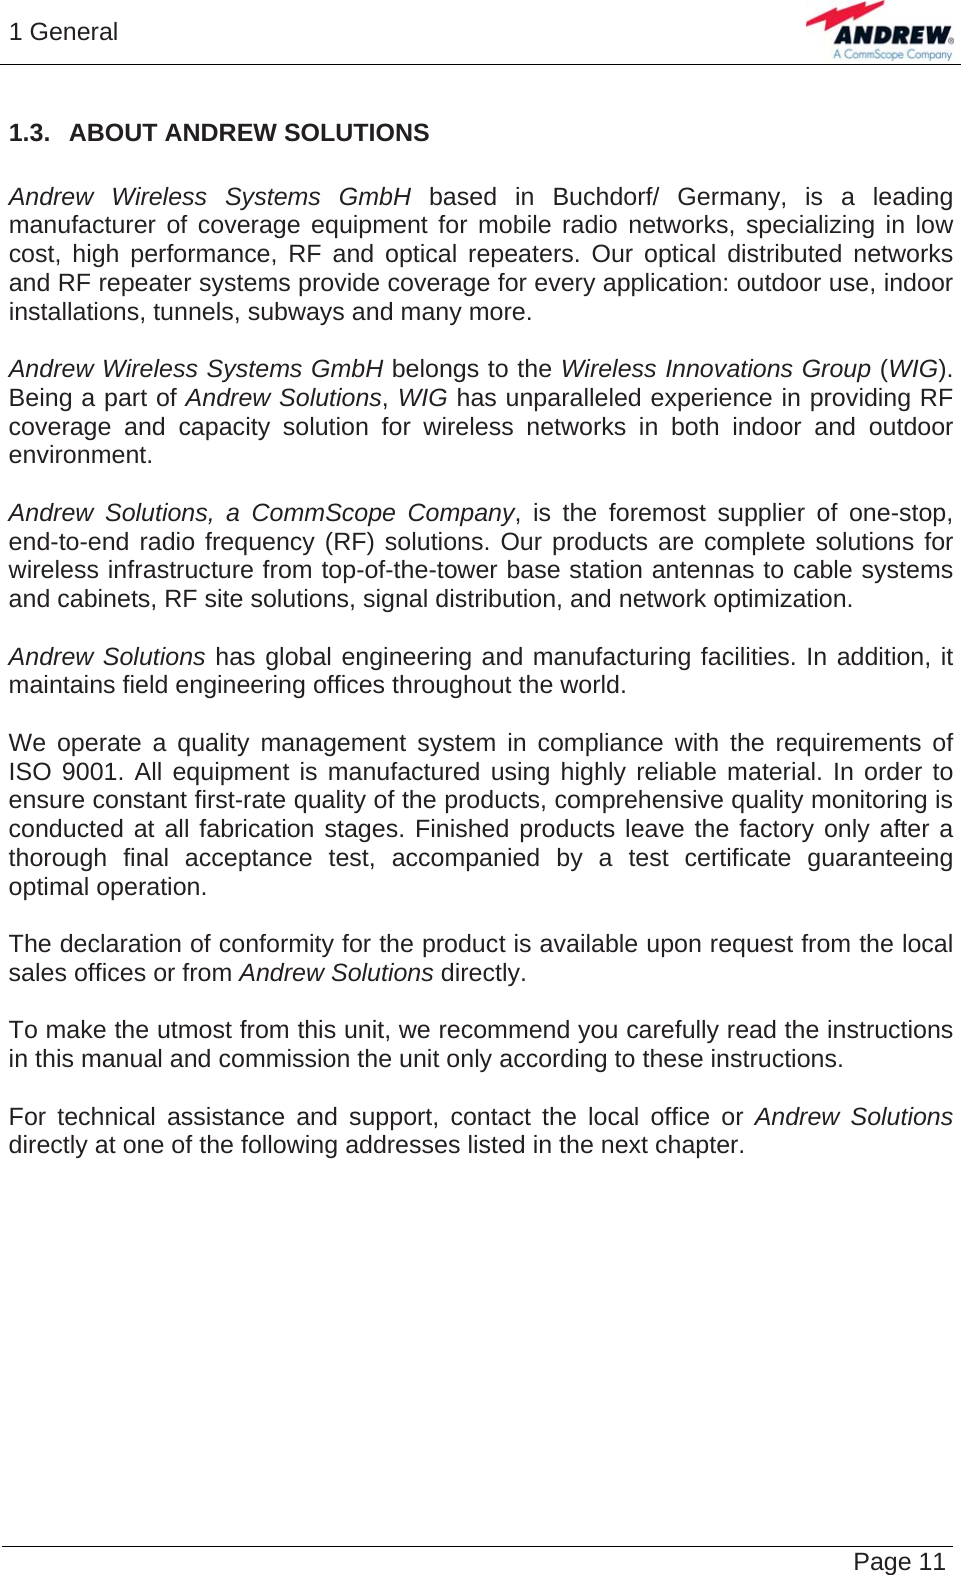 1 General   Page 11 1.3.  ABOUT ANDREW SOLUTIONS  Andrew Wireless Systems GmbH based in Buchdorf/ Germany, is a leading manufacturer of coverage equipment for mobile radio networks, specializing in low cost, high performance, RF and optical repeaters. Our optical distributed networks and RF repeater systems provide coverage for every application: outdoor use, indoor installations, tunnels, subways and many more.  Andrew Wireless Systems GmbH belongs to the Wireless Innovations Group (WIG). Being a part of Andrew Solutions, WIG has unparalleled experience in providing RF coverage and capacity solution for wireless networks in both indoor and outdoor environment.  Andrew Solutions, a CommScope Company, is the foremost supplier of one-stop, end-to-end radio frequency (RF) solutions. Our products are complete solutions for wireless infrastructure from top-of-the-tower base station antennas to cable systems and cabinets, RF site solutions, signal distribution, and network optimization.  Andrew Solutions has global engineering and manufacturing facilities. In addition, it maintains field engineering offices throughout the world.  We operate a quality management system in compliance with the requirements of ISO 9001. All equipment is manufactured using highly reliable material. In order to ensure constant first-rate quality of the products, comprehensive quality monitoring is conducted at all fabrication stages. Finished products leave the factory only after a thorough final acceptance test, accompanied by a test certificate guaranteeing optimal operation.  The declaration of conformity for the product is available upon request from the local sales offices or from Andrew Solutions directly.  To make the utmost from this unit, we recommend you carefully read the instructions in this manual and commission the unit only according to these instructions.  For technical assistance and support, contact the local office or Andrew Solutions directly at one of the following addresses listed in the next chapter.    